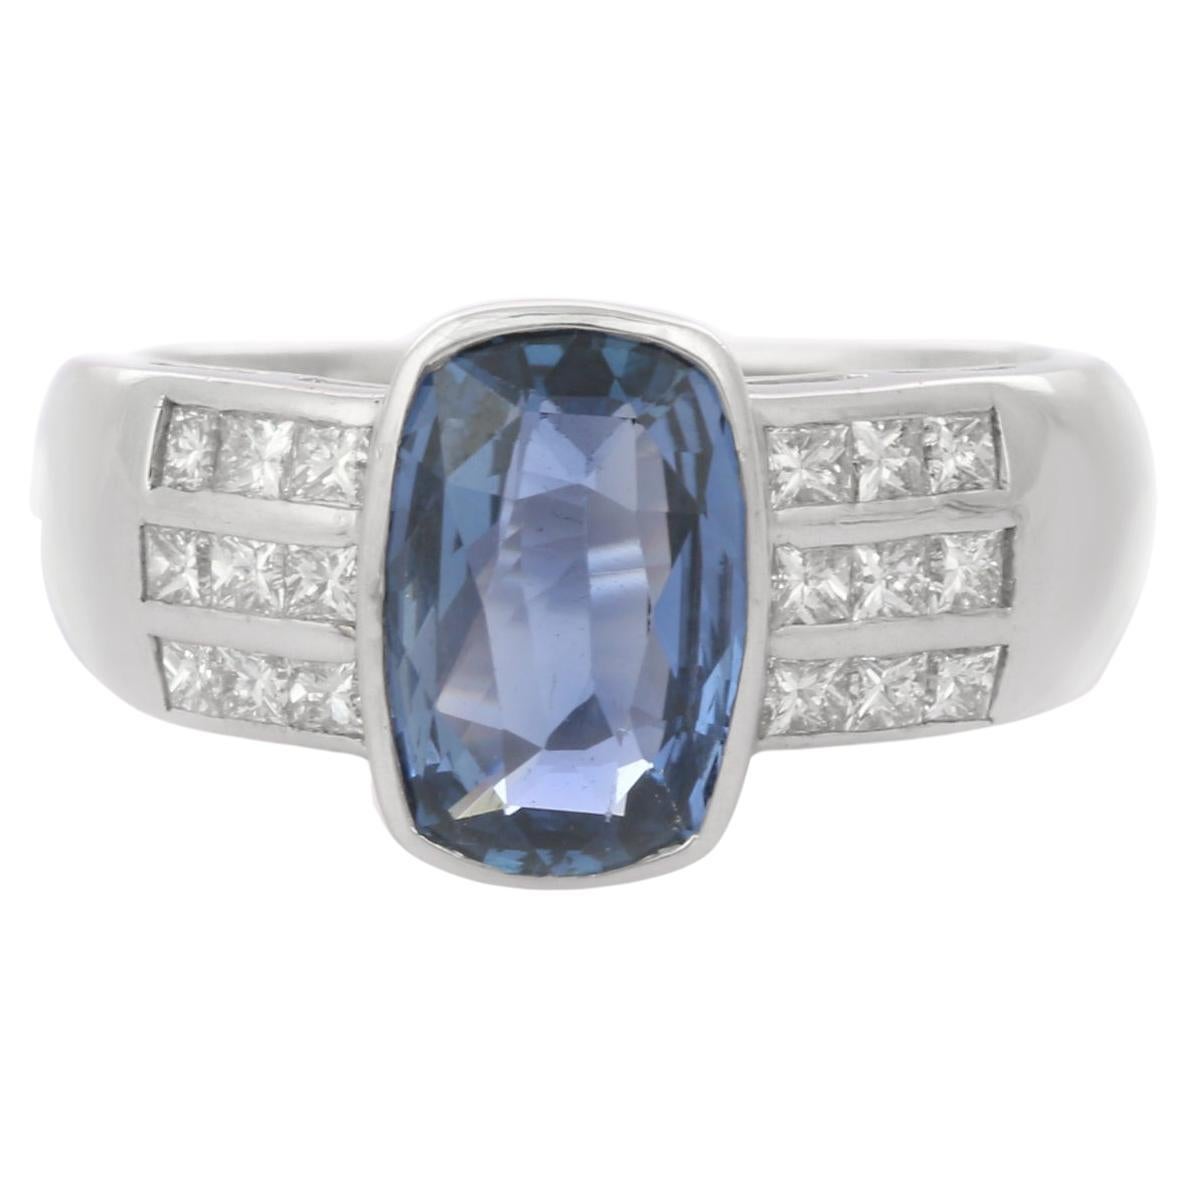 18K White Gold Oblong Cushion Cut Blue Sapphire and Diamond Engagement Ring